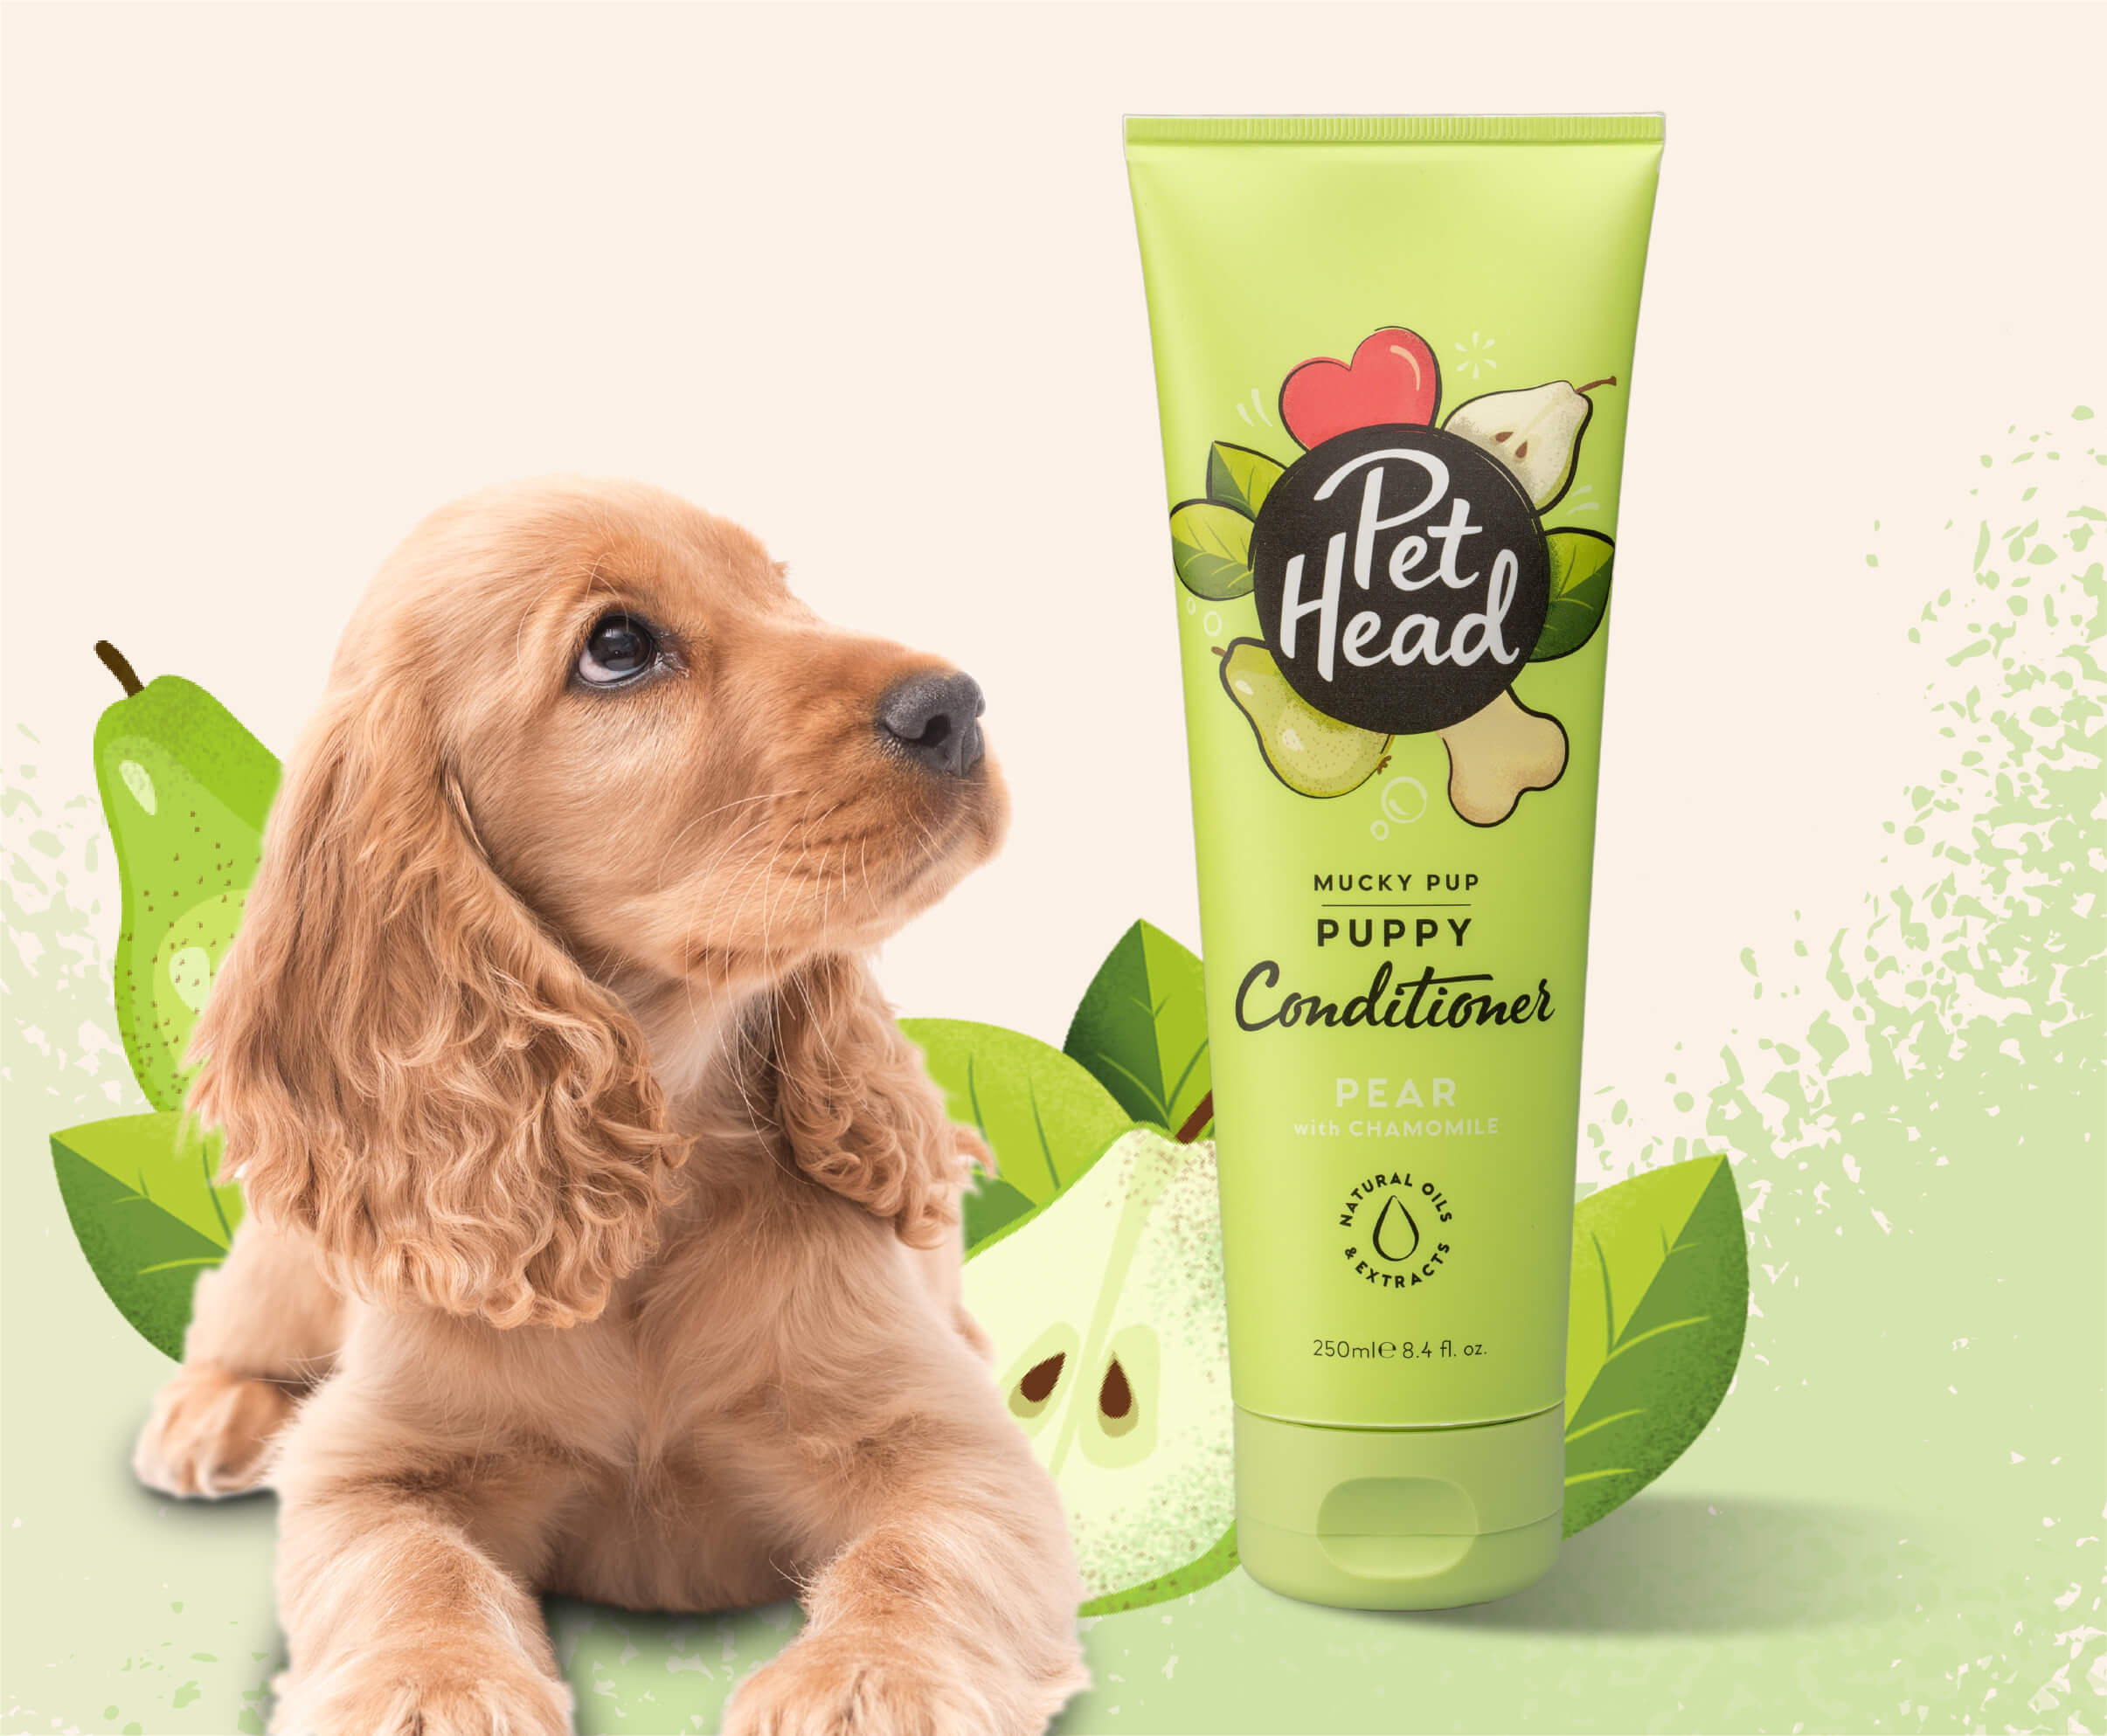 Product shot of the Pet Head Mucky Pup Conditioner with a cockapoo in the background